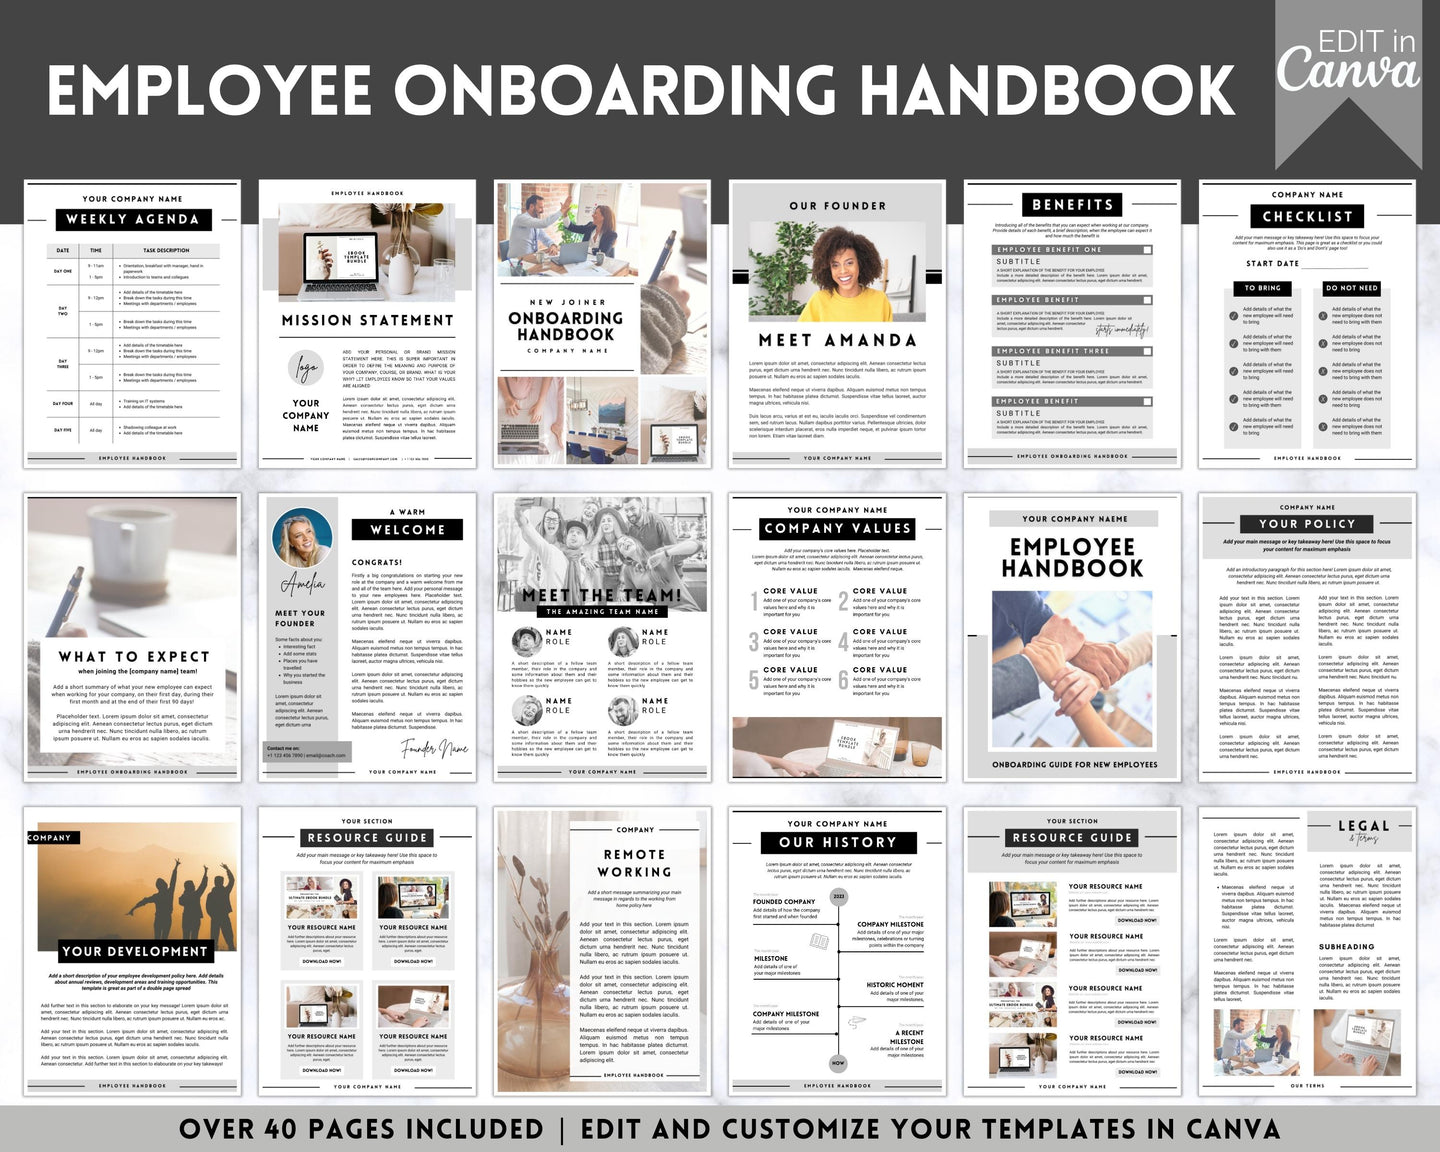 Employee Onboarding Handbook Template | New Hire Welcome Packet & New Hire Checklist | Editable eBook Canva Template | Mono